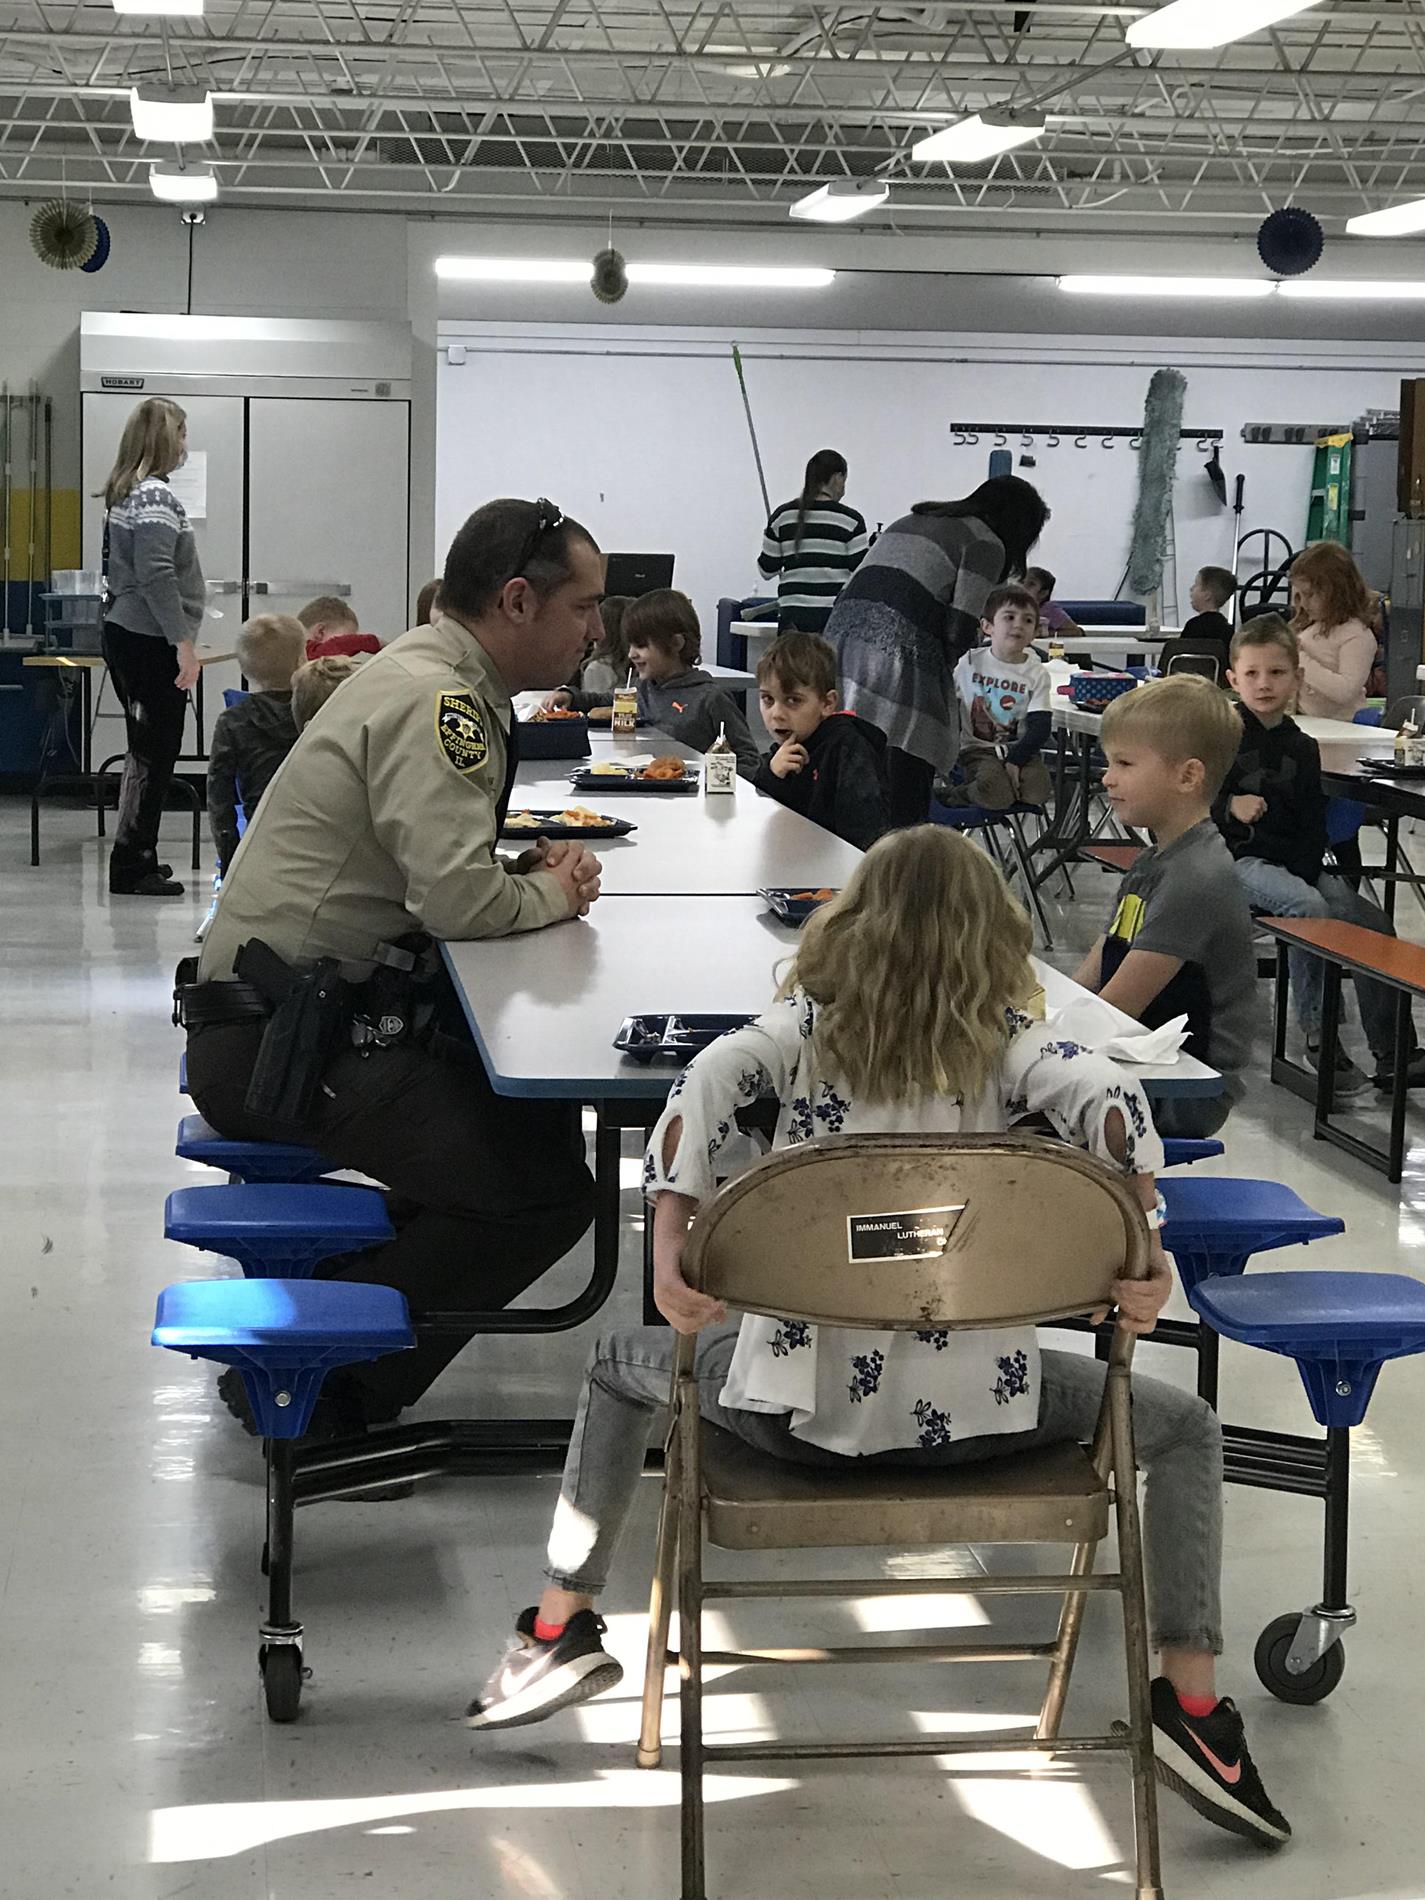 Lower grade students having lunch and talking with Officer Ritz.